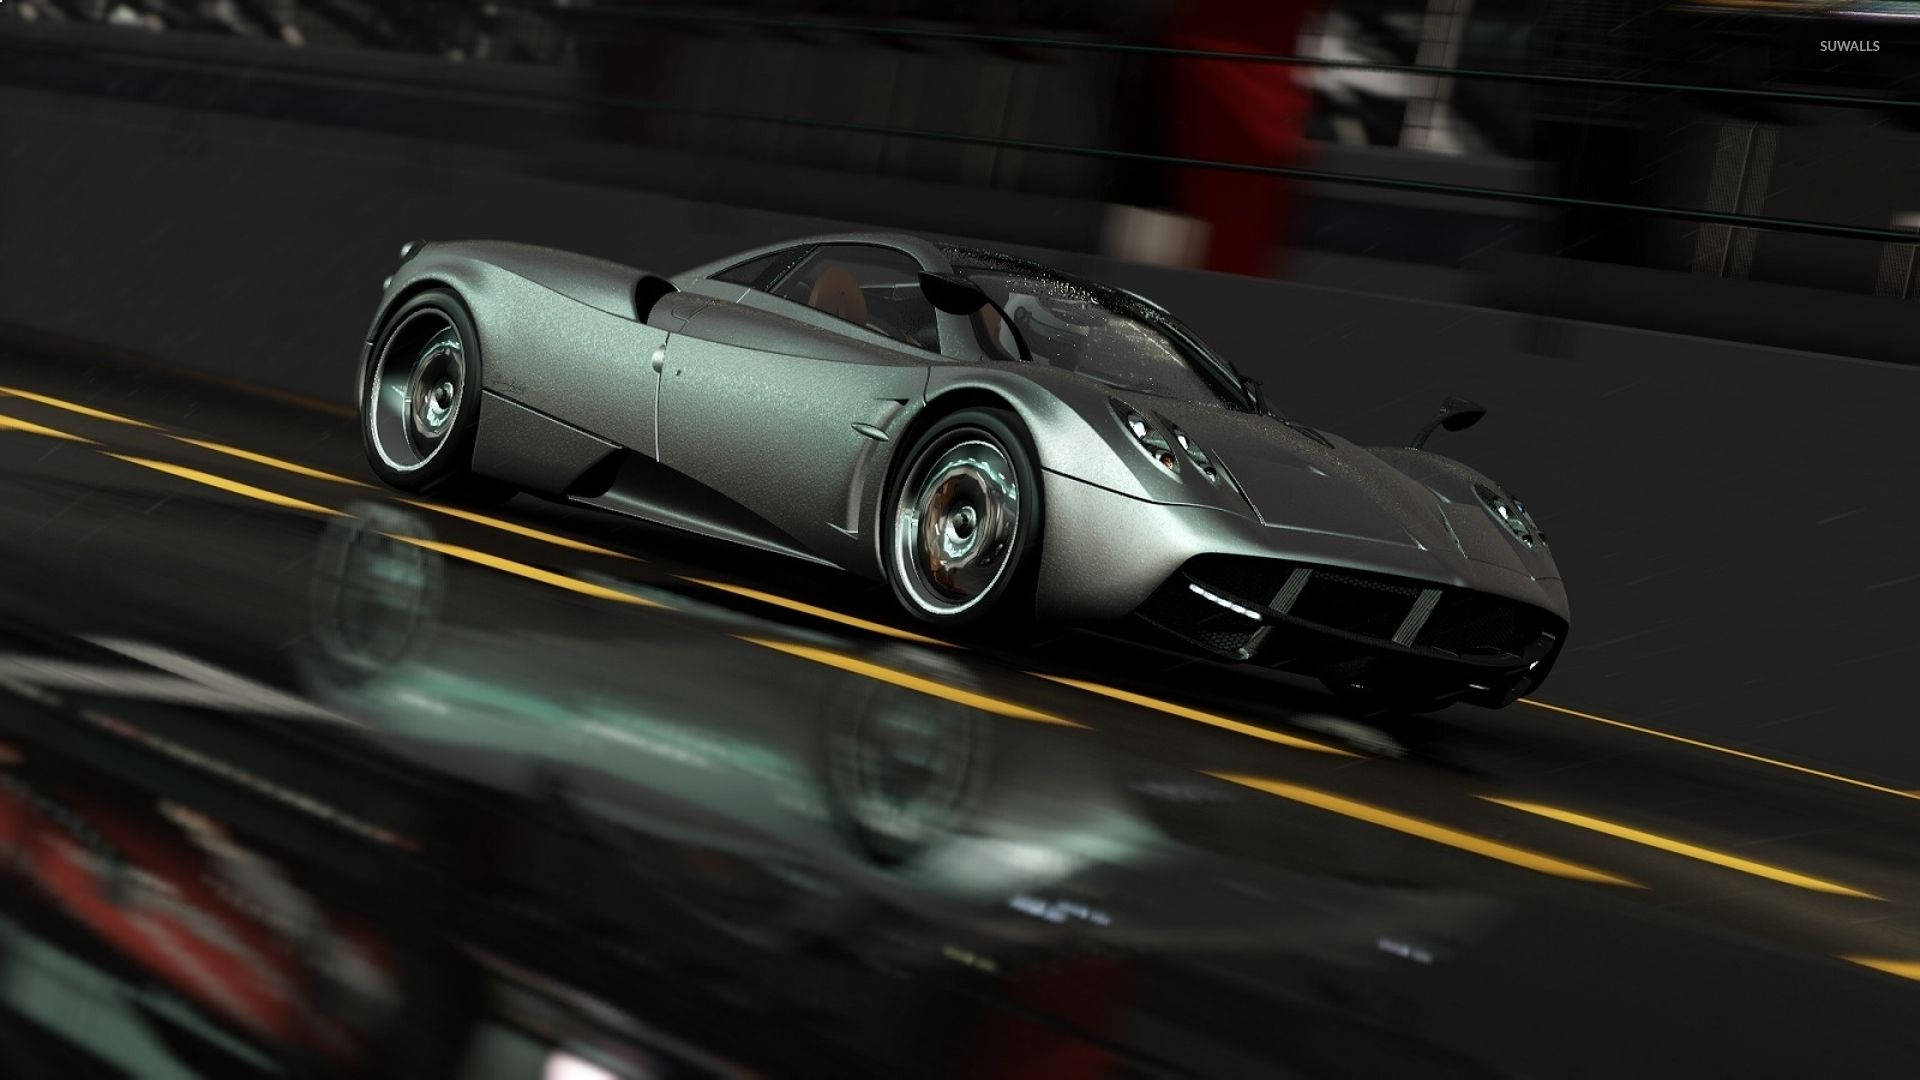 The Thrill Of Speed In Project Cars 2 With Pagani Huayra. Background